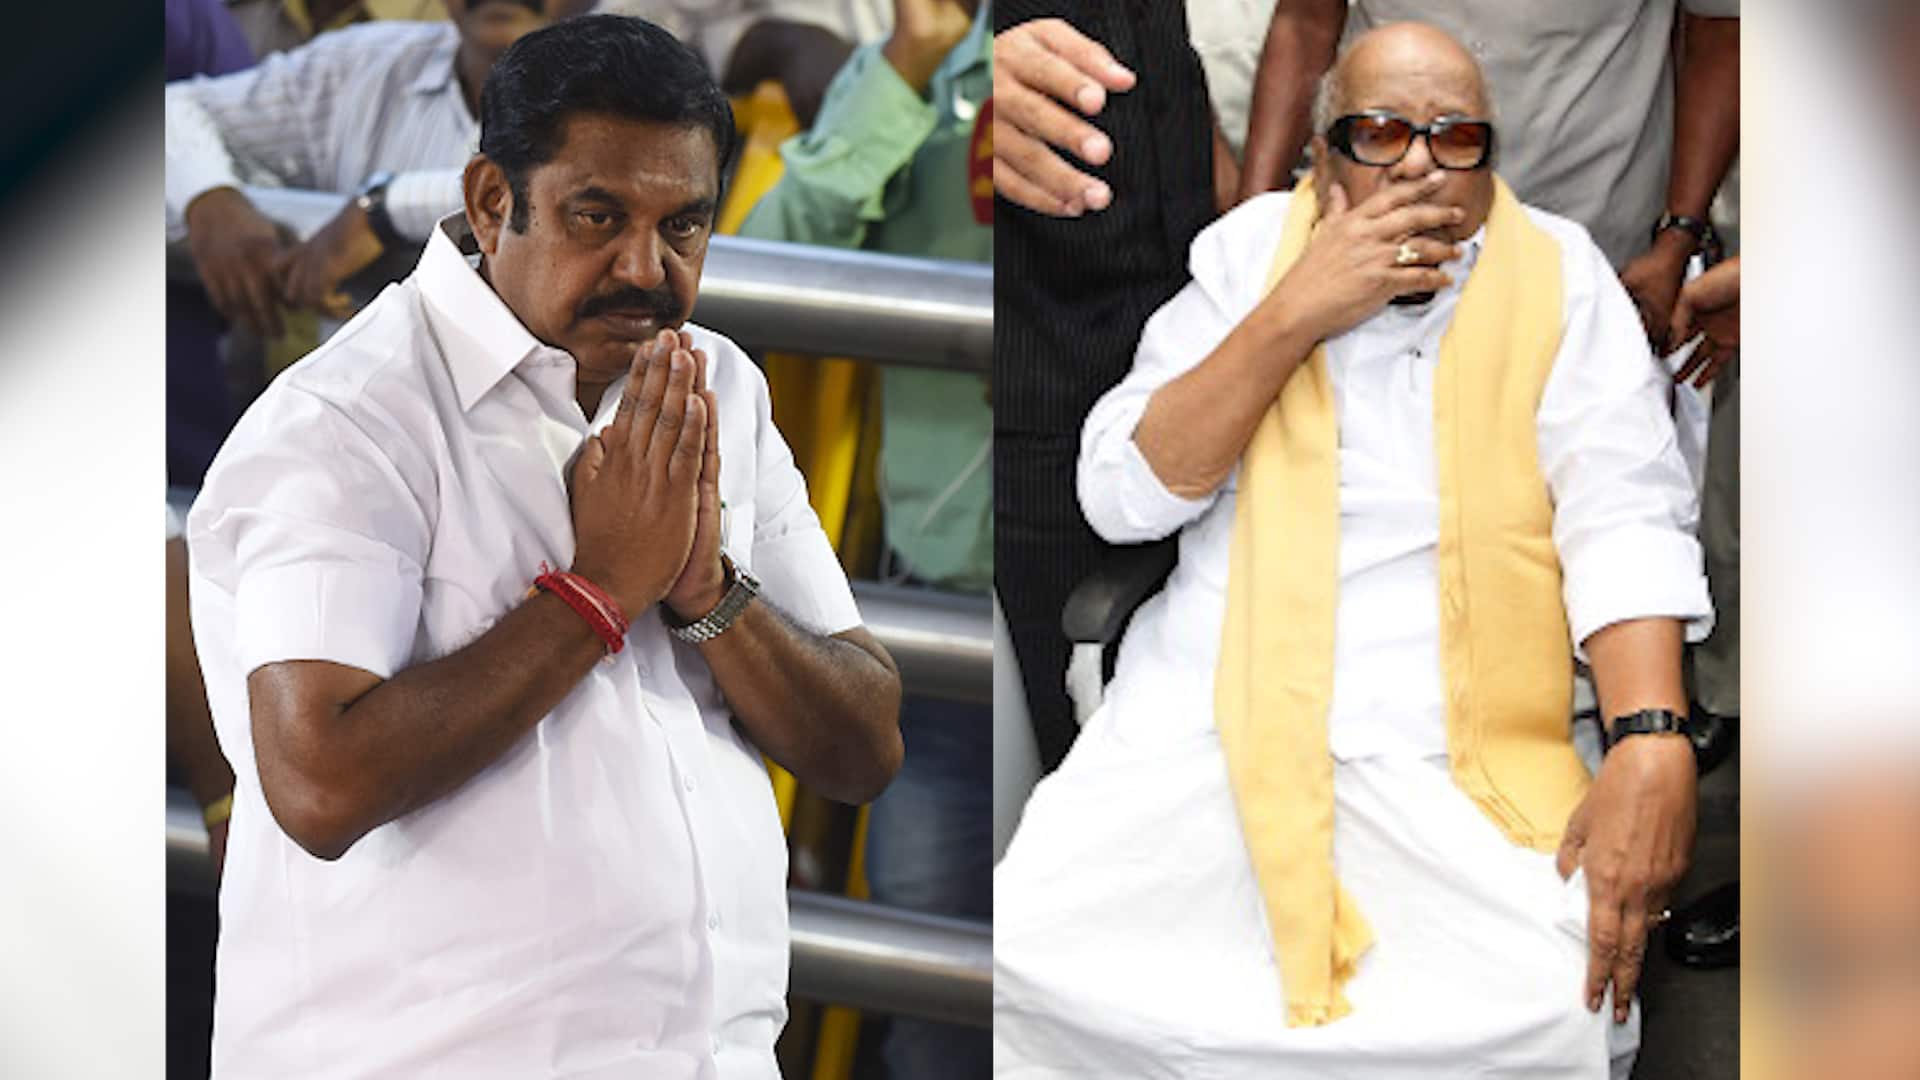 Karunanidhi gets Tamil Nadu CM's support in hospital but not in Madras High Court